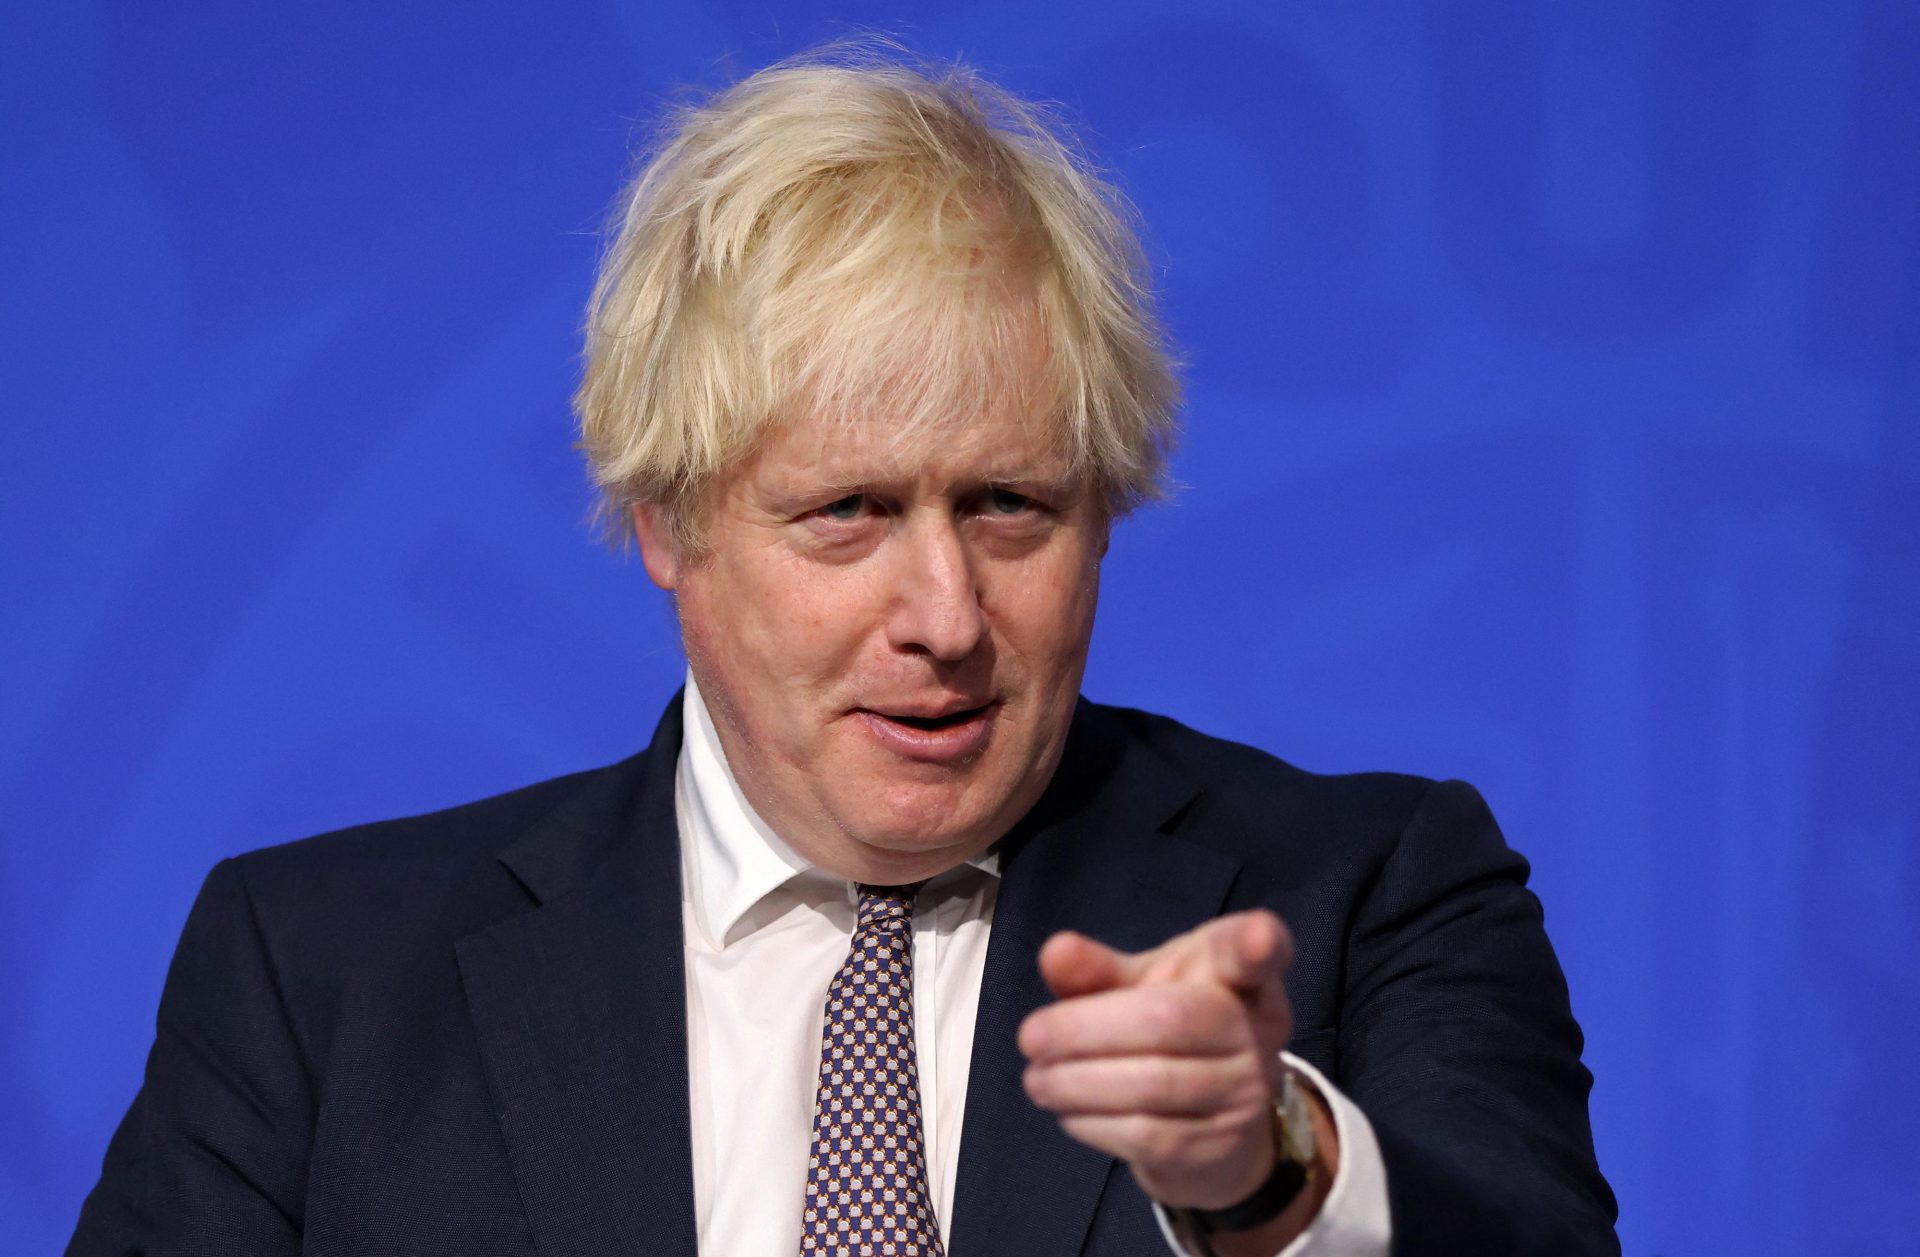 Boris Johnson gestures during his media briefing
on the Covid-19 Omicron strain. Photo: Hollie Adams/Pool/AFP via Getty Images.